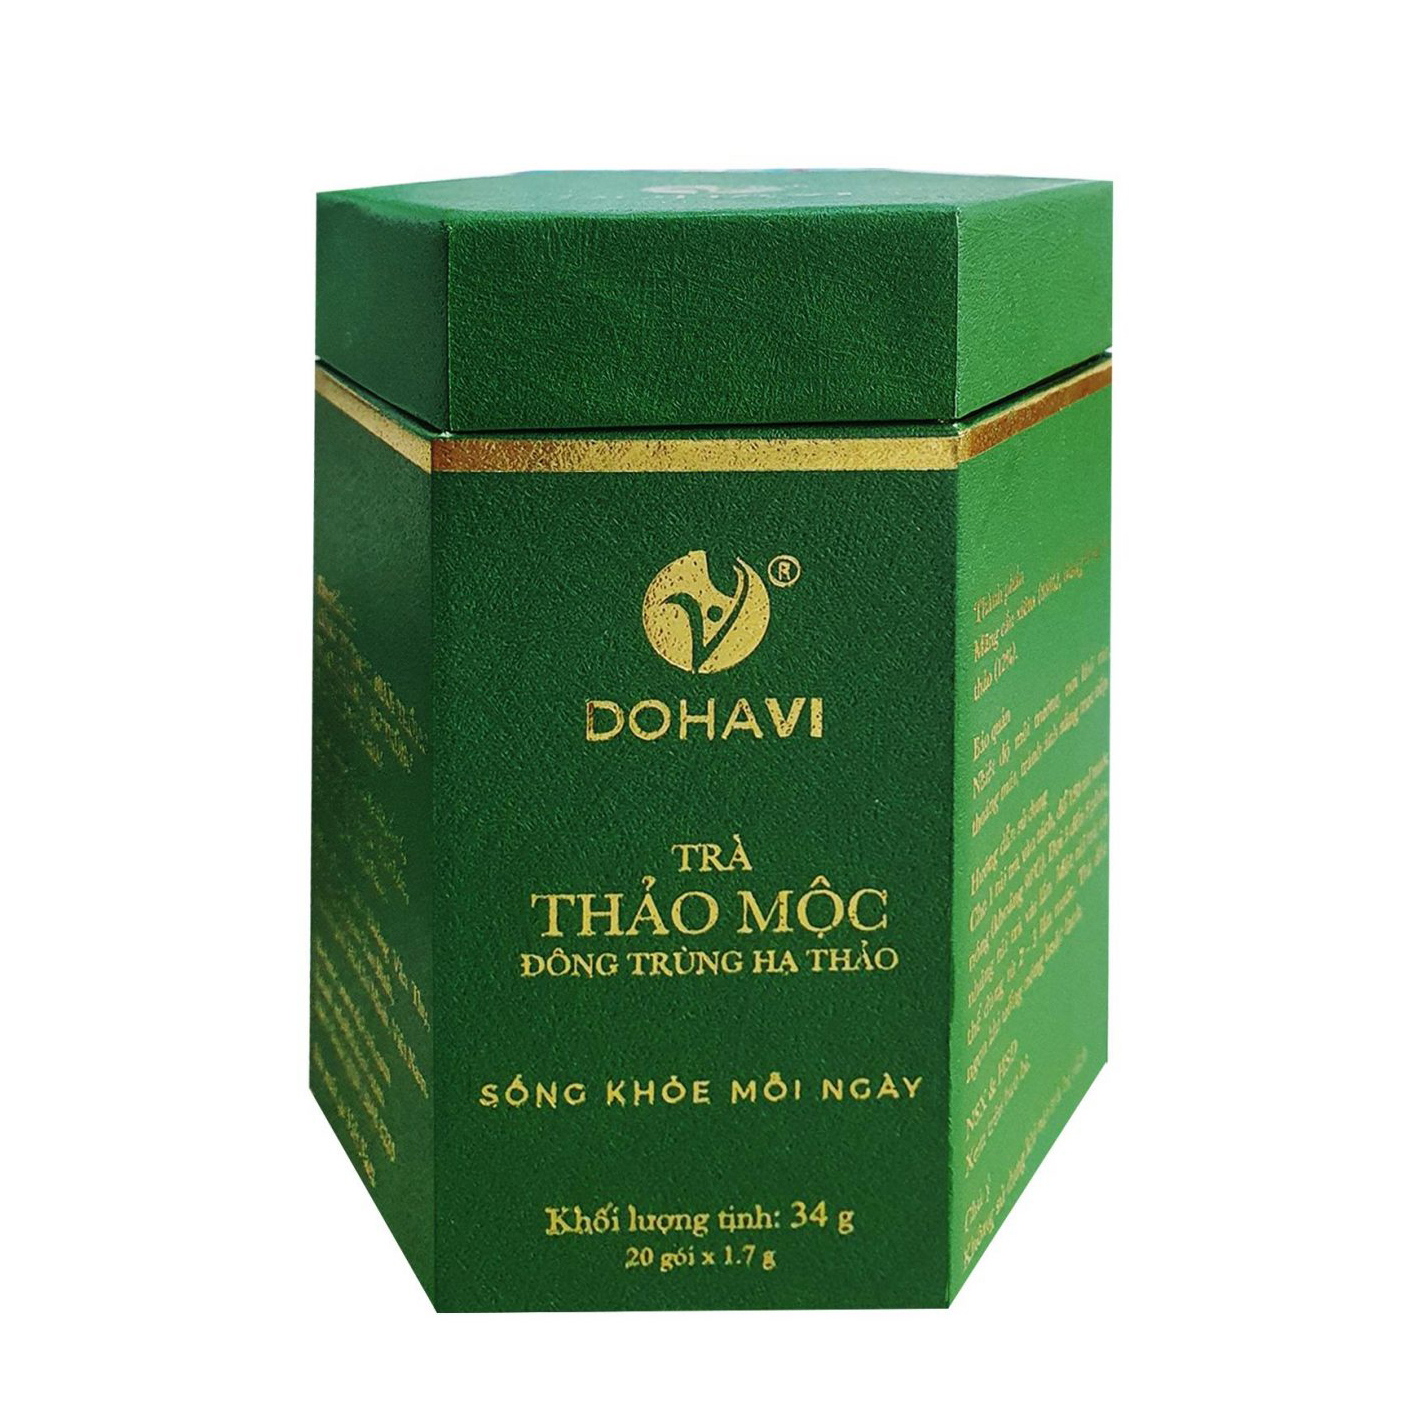 tra dong trung ha thao 2